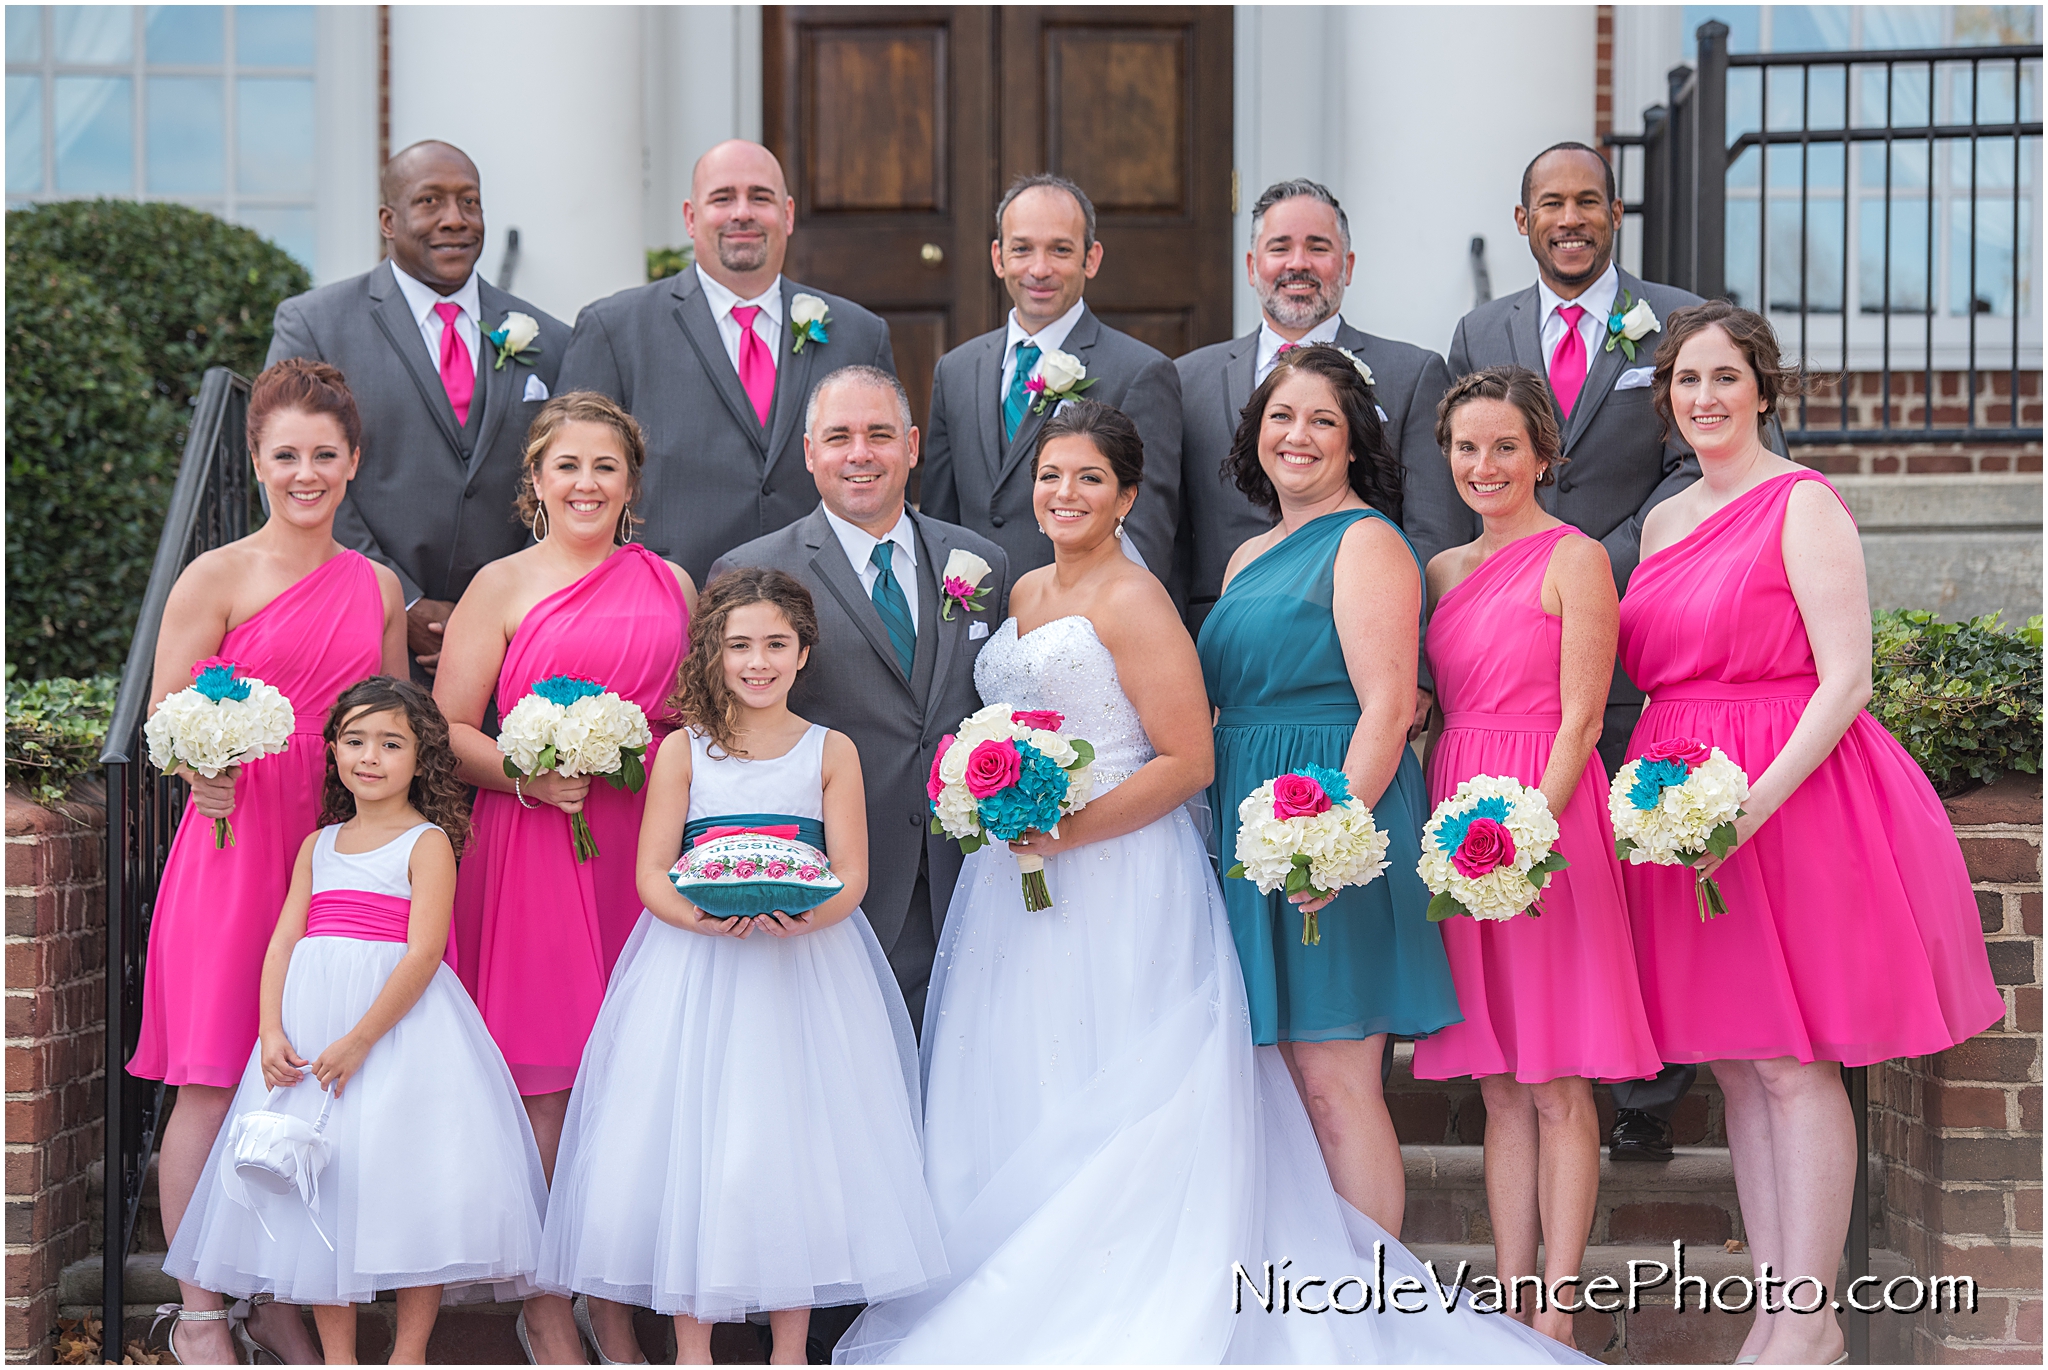 Wedding party portrait on the steps at Virginia Crossings.